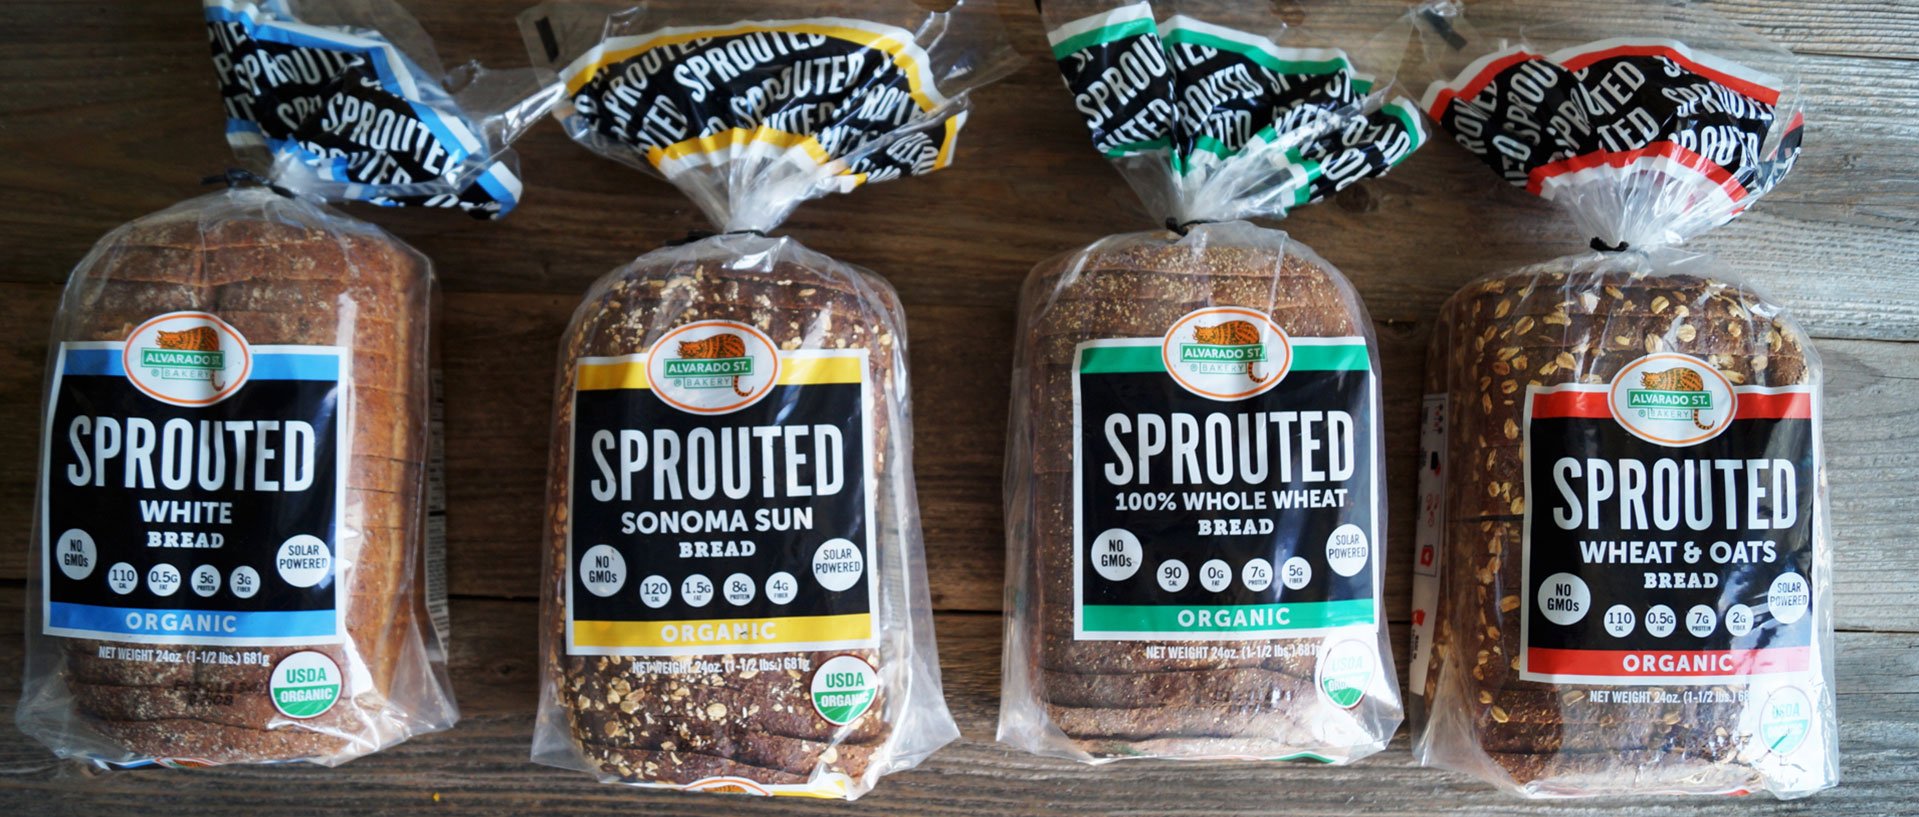 Sprouted white bread, sprouted Sonoma Sun bread, Sprouted Wheat and Oats bread loaves in a row